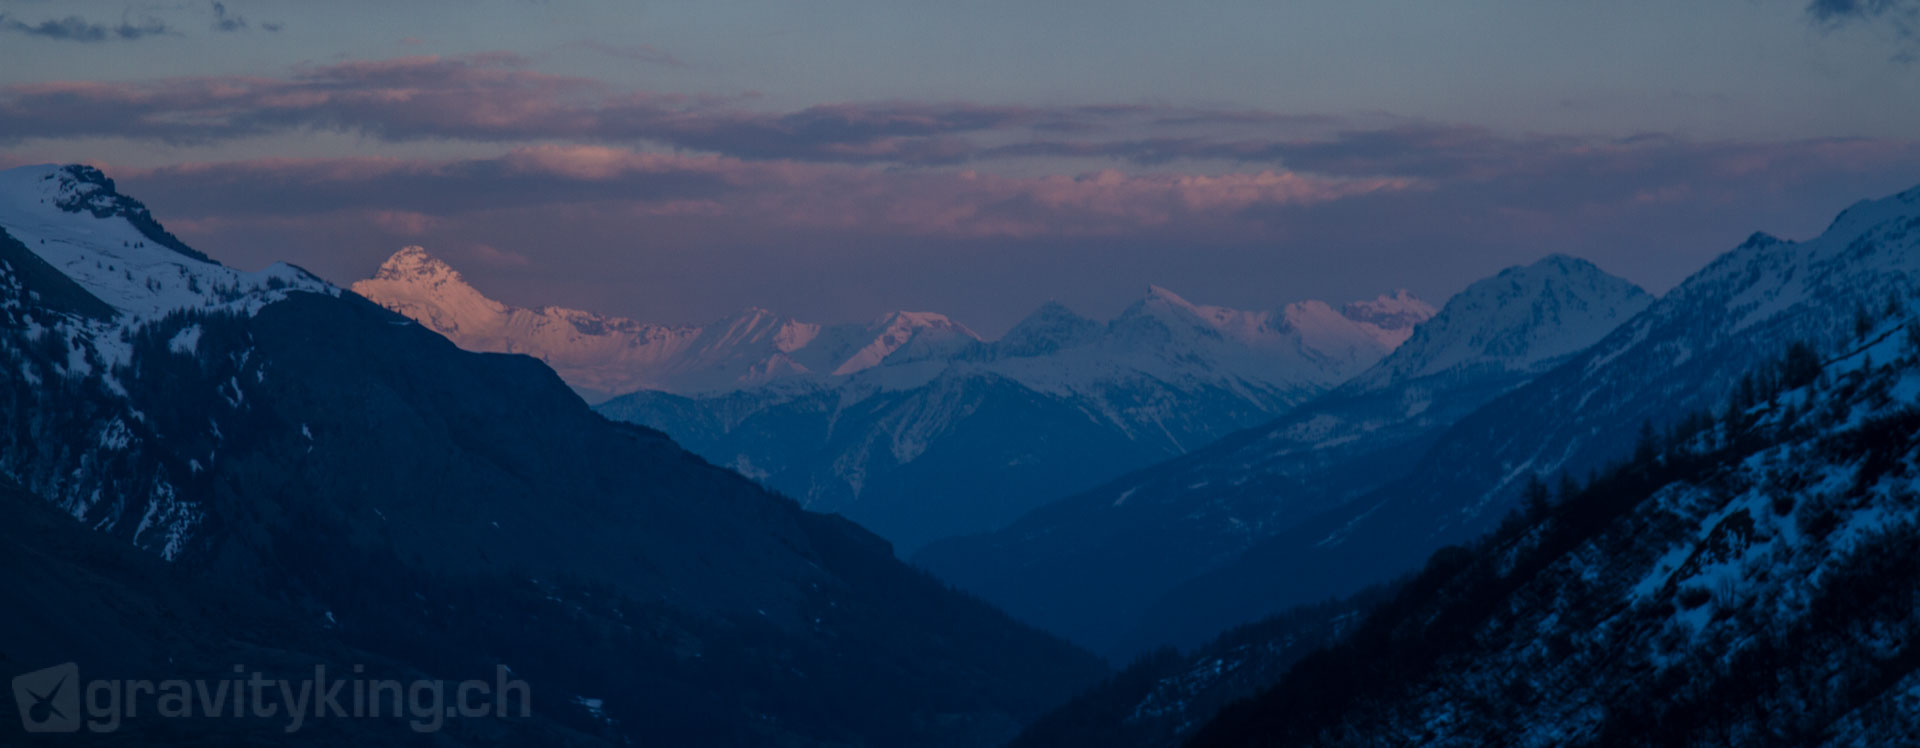 Serre Chevalier alpenglow, French Alps